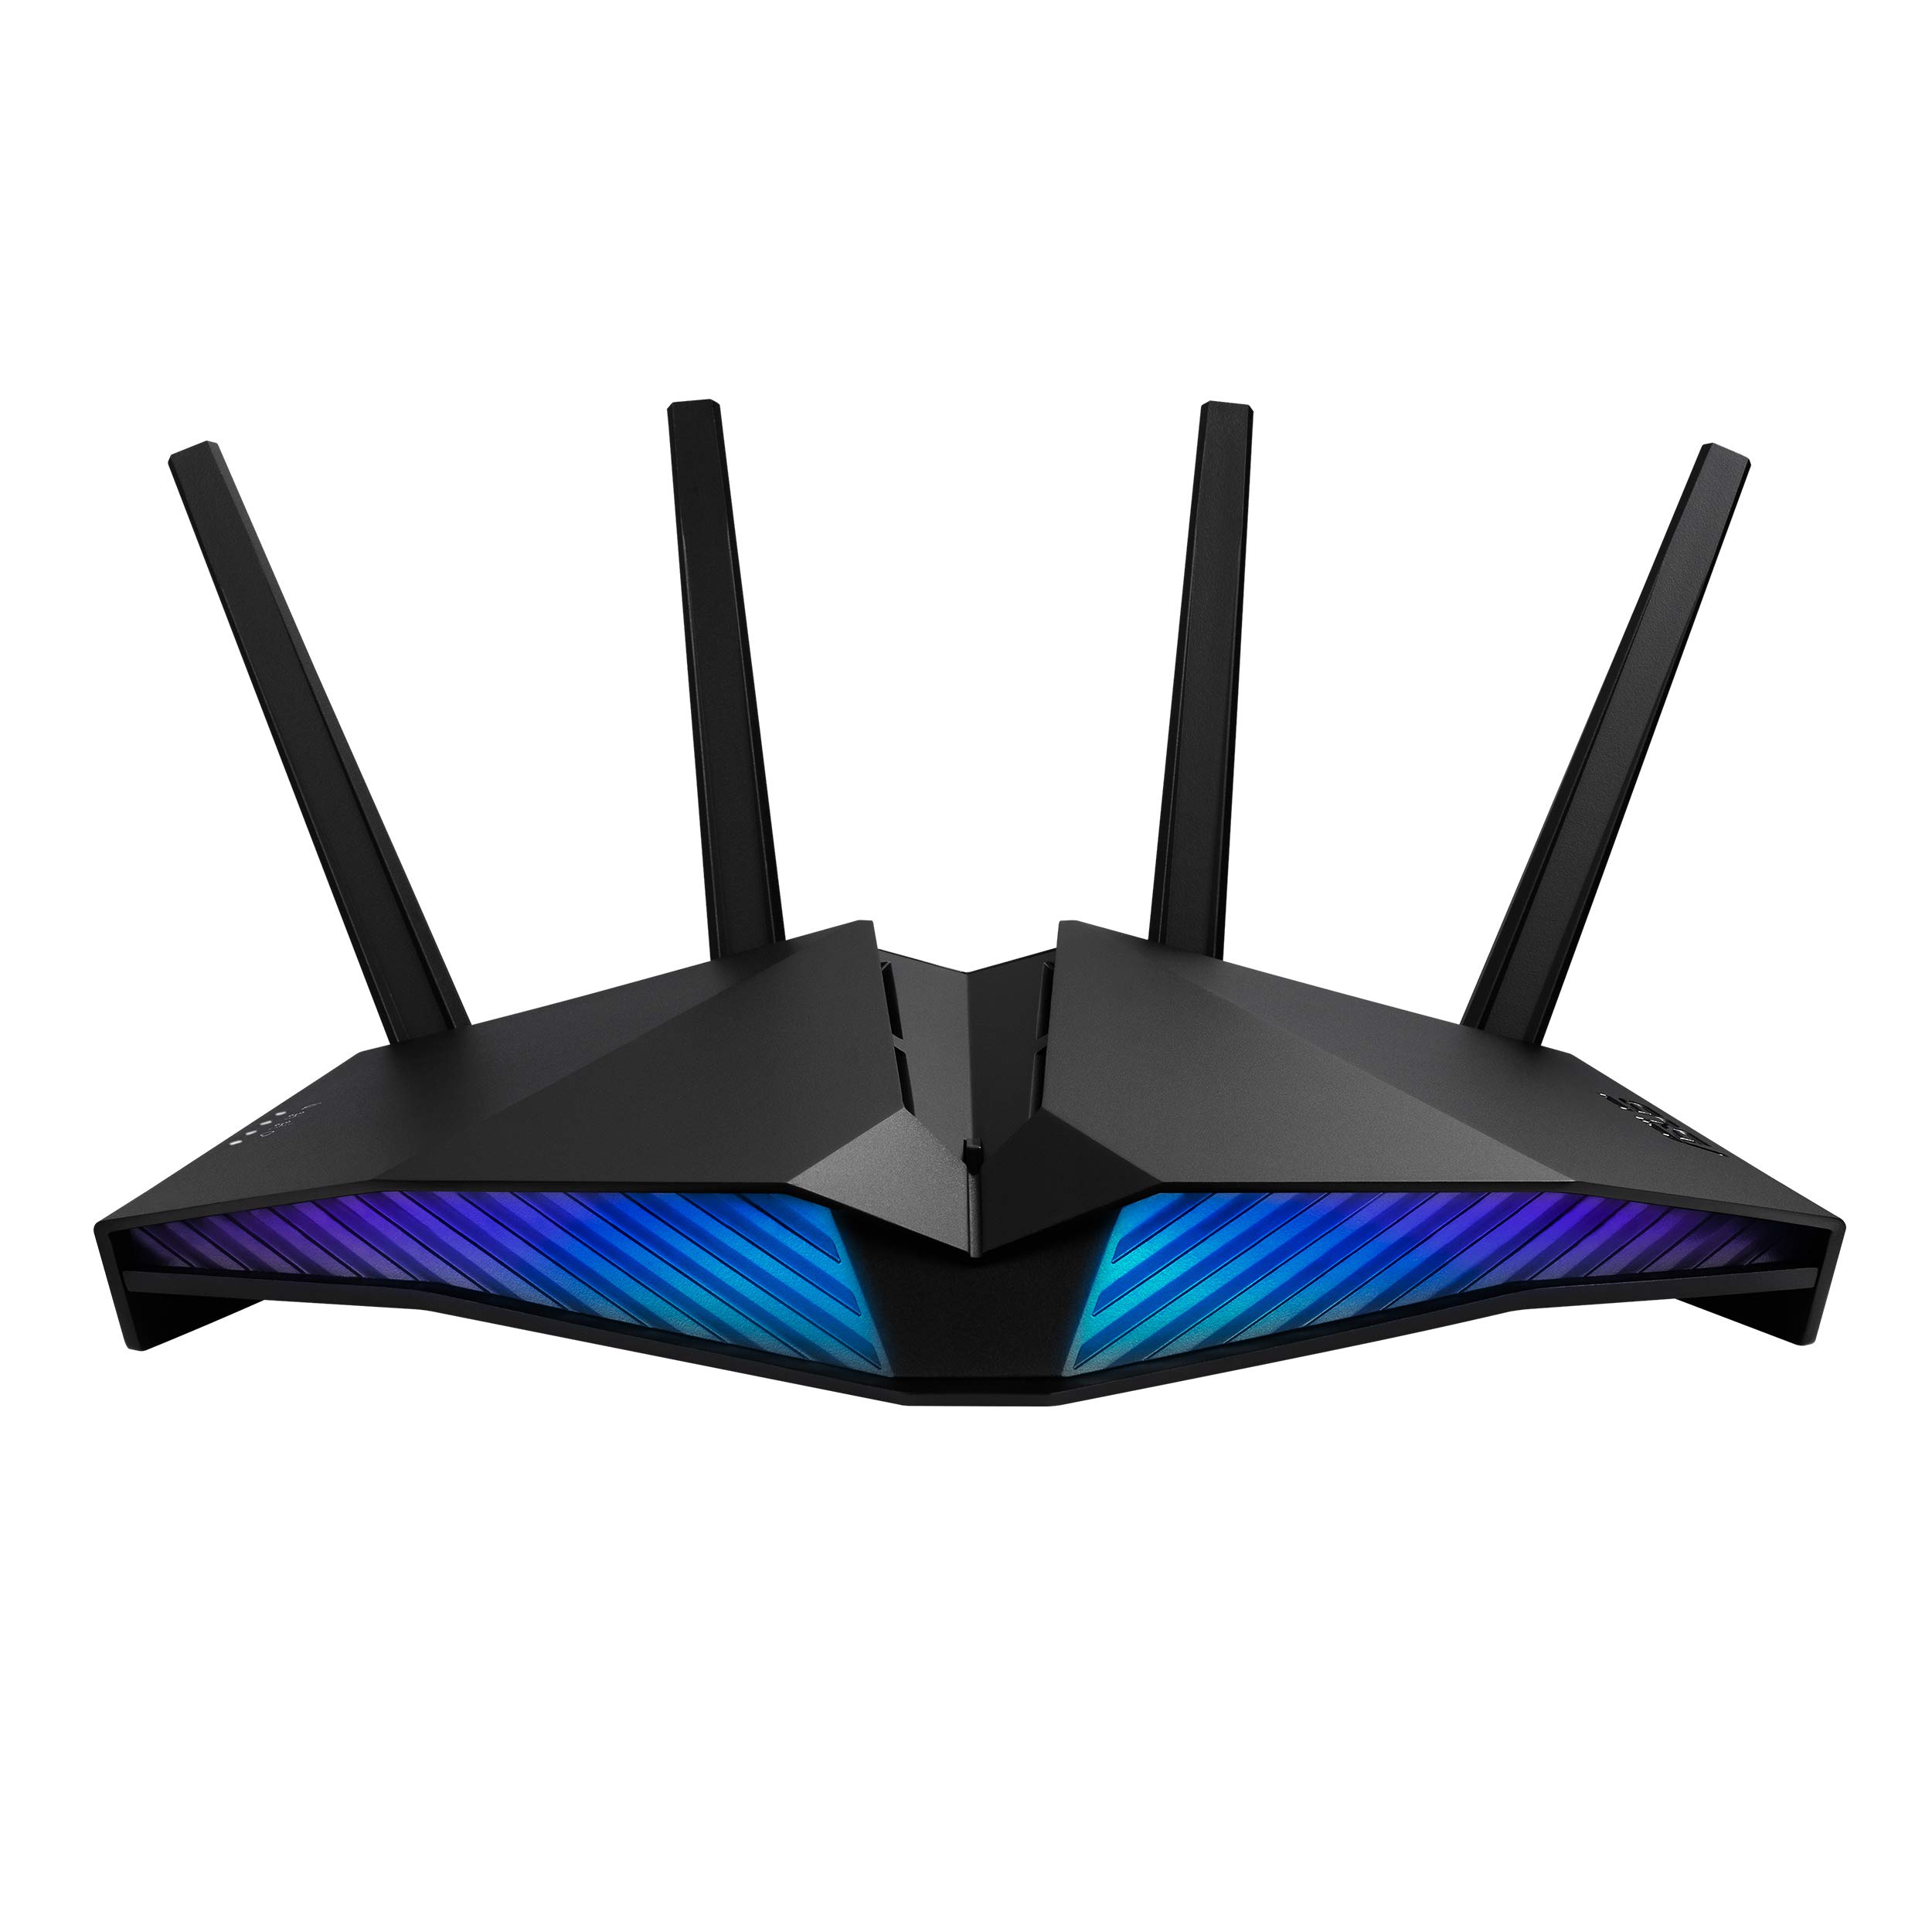 Asus ROG Strix AX5400 WiFi 6 Gaming Router (GS-AX5400) ...